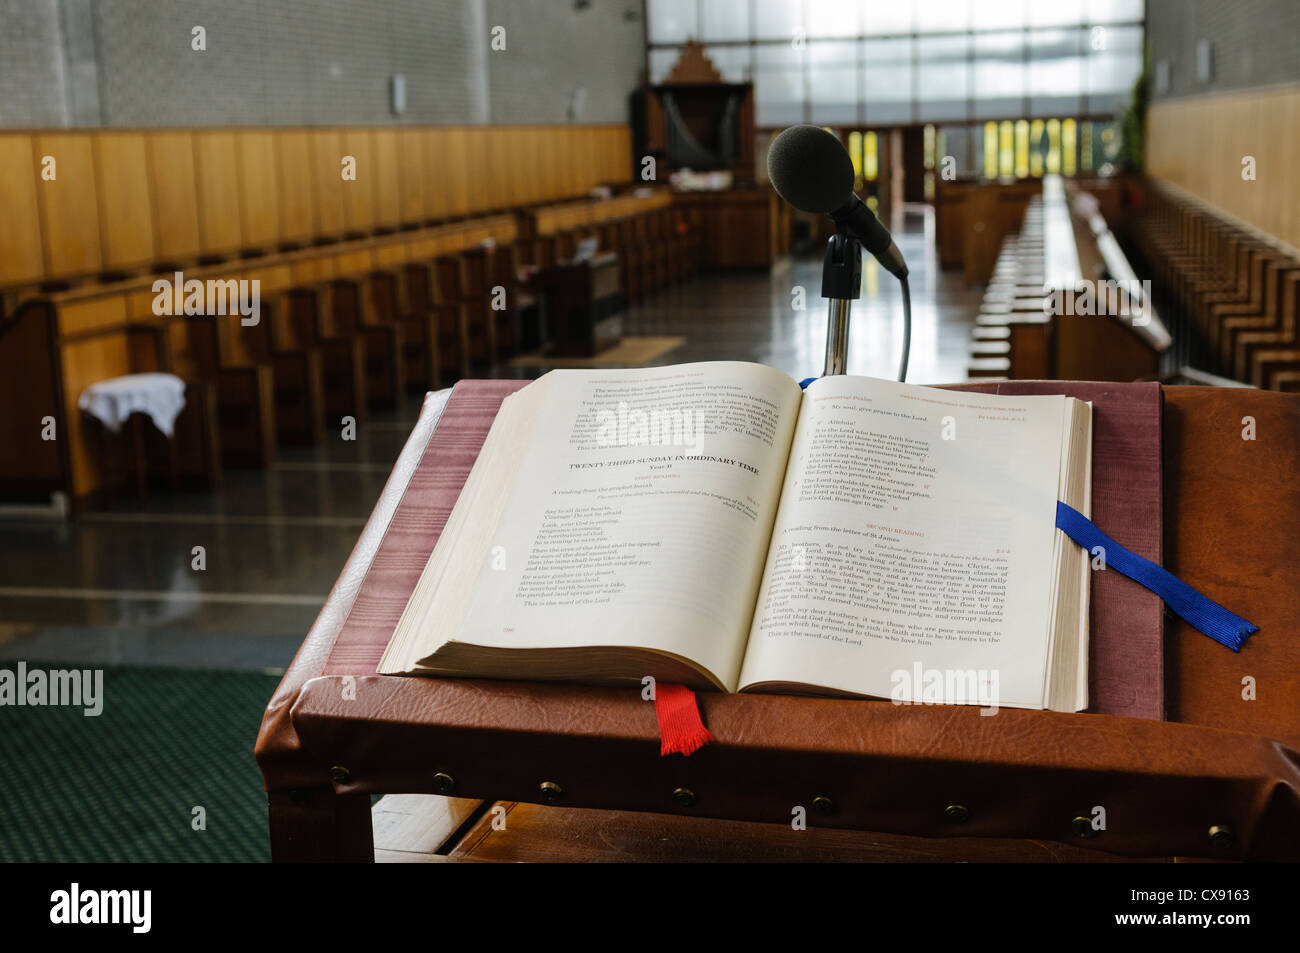 Church service book opened at the page for the 23rd Sunday in a monastery Stock Photo